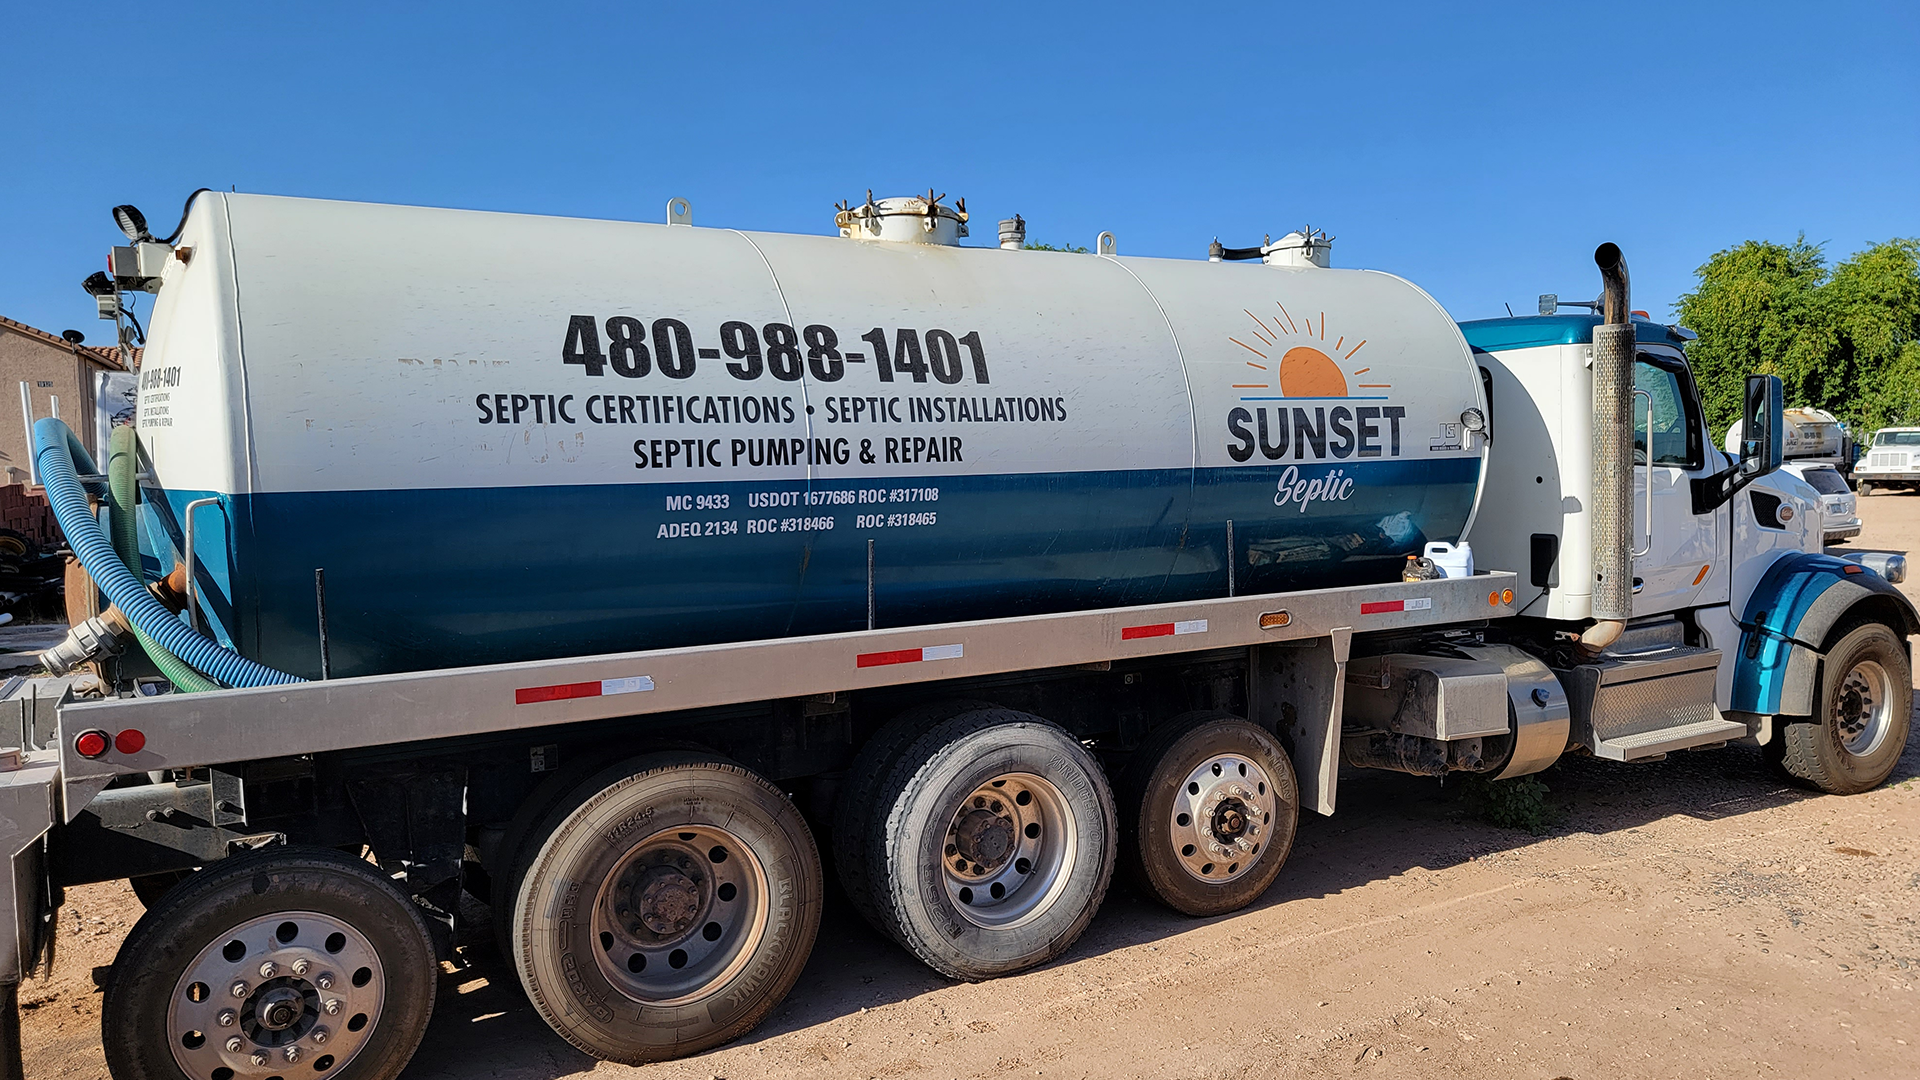 Sunset Septic septic clean out truck for residential and commercial use in Maricopa and Pinal counties, Phoenix Arizona area.